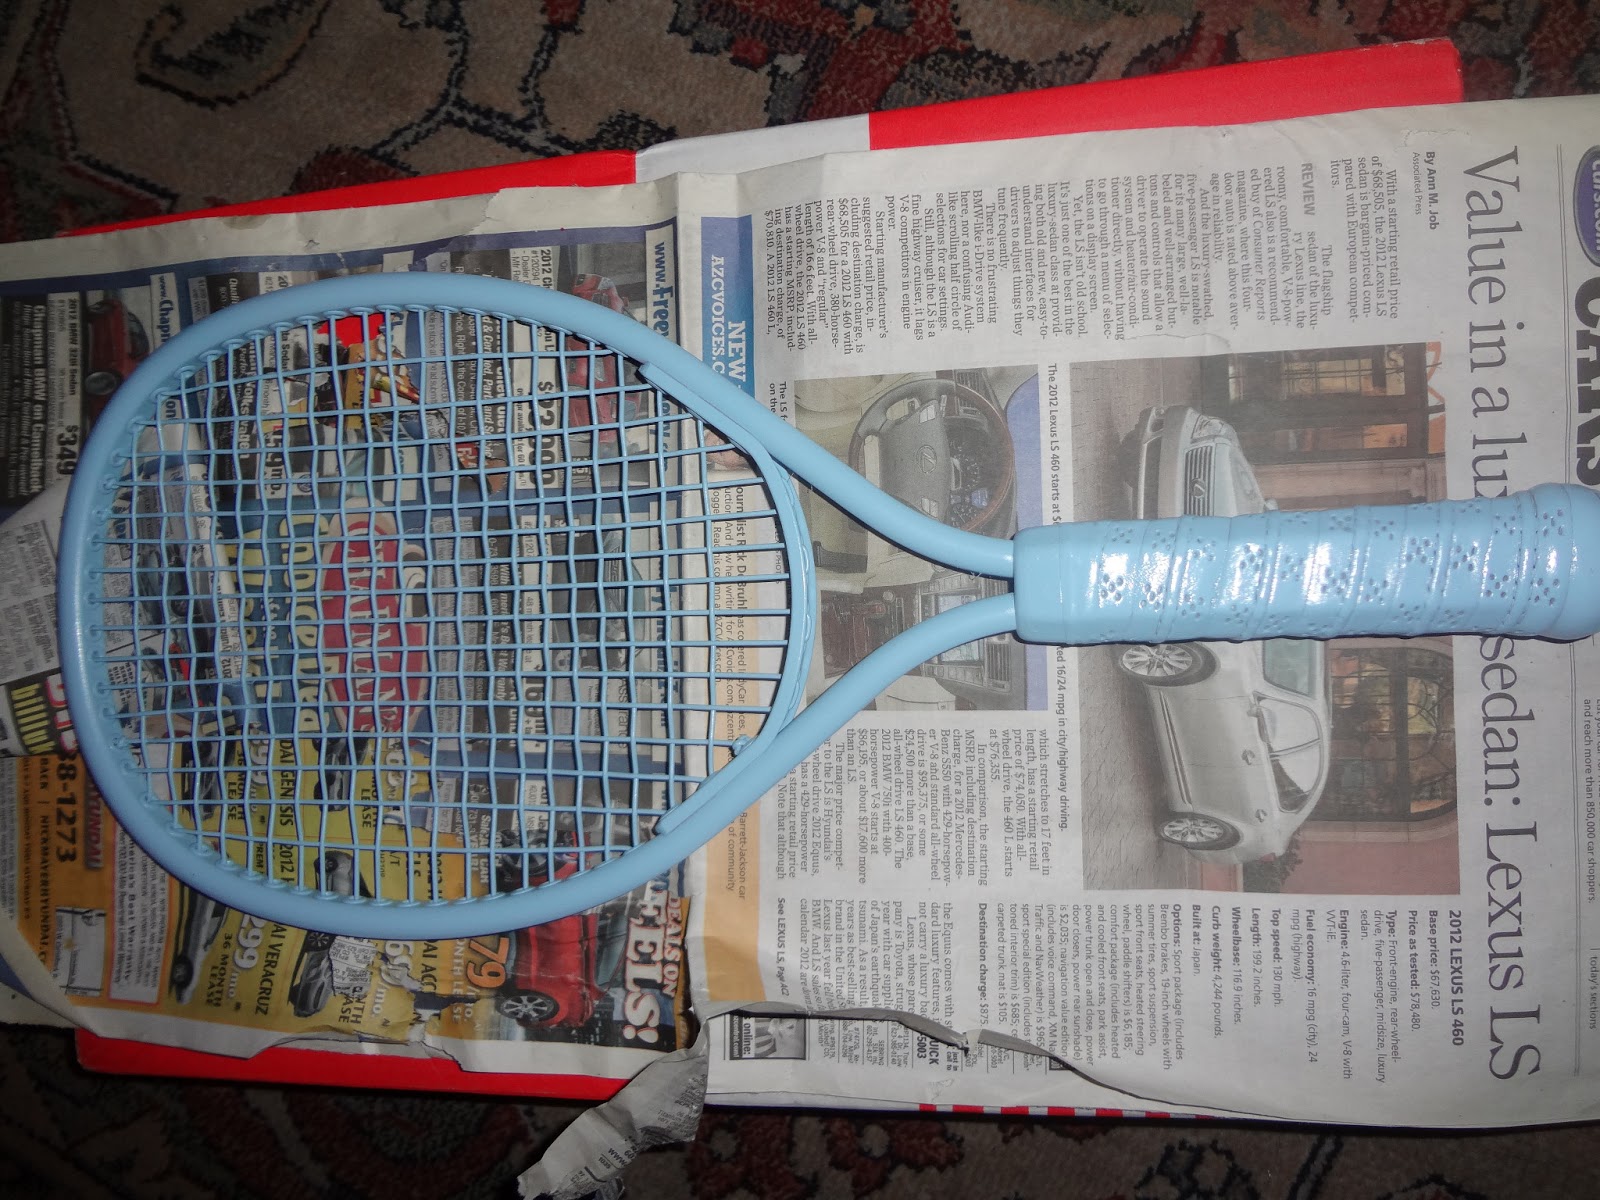 meester rouw attent The Busy Broad: DIY Tennis Racquet Mirror